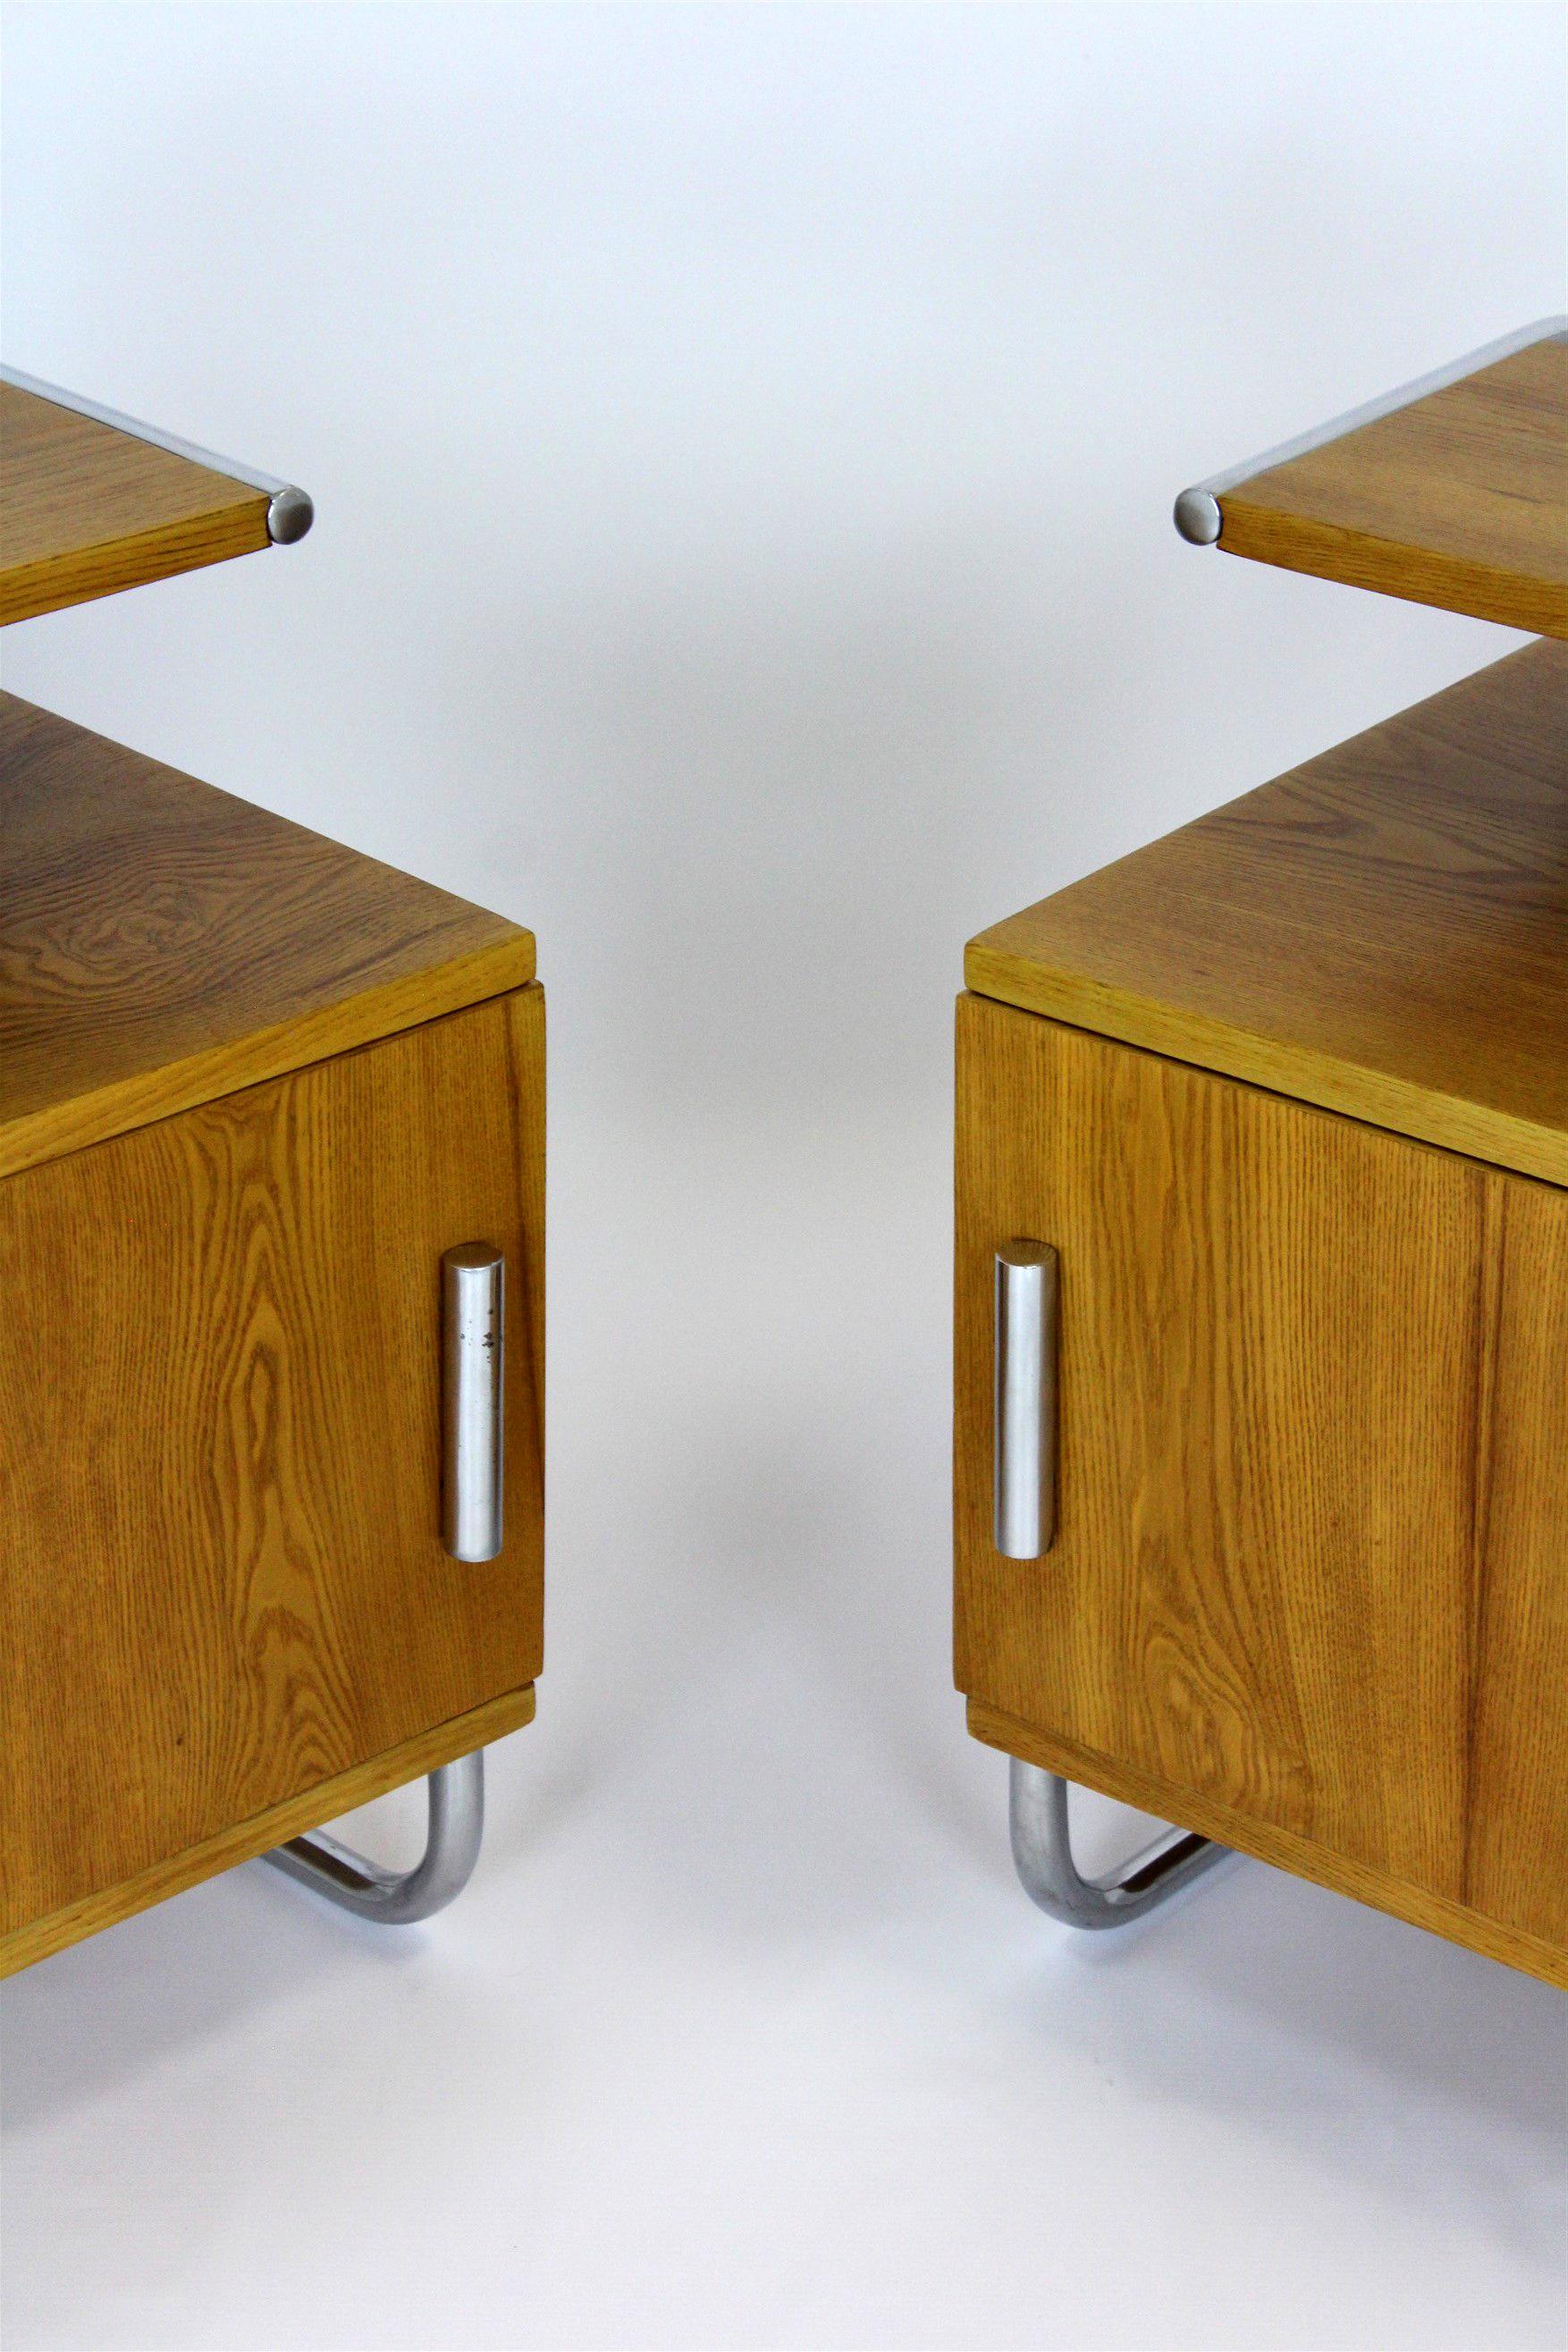 This set of two Bauhaus style bedside tables was produced in the 1940's by Famed Zadziele. They are made of oak and a chrome tubular steel frame. The Famed company was founded in 1921 and produced tubular furniture, also under license from Thonet